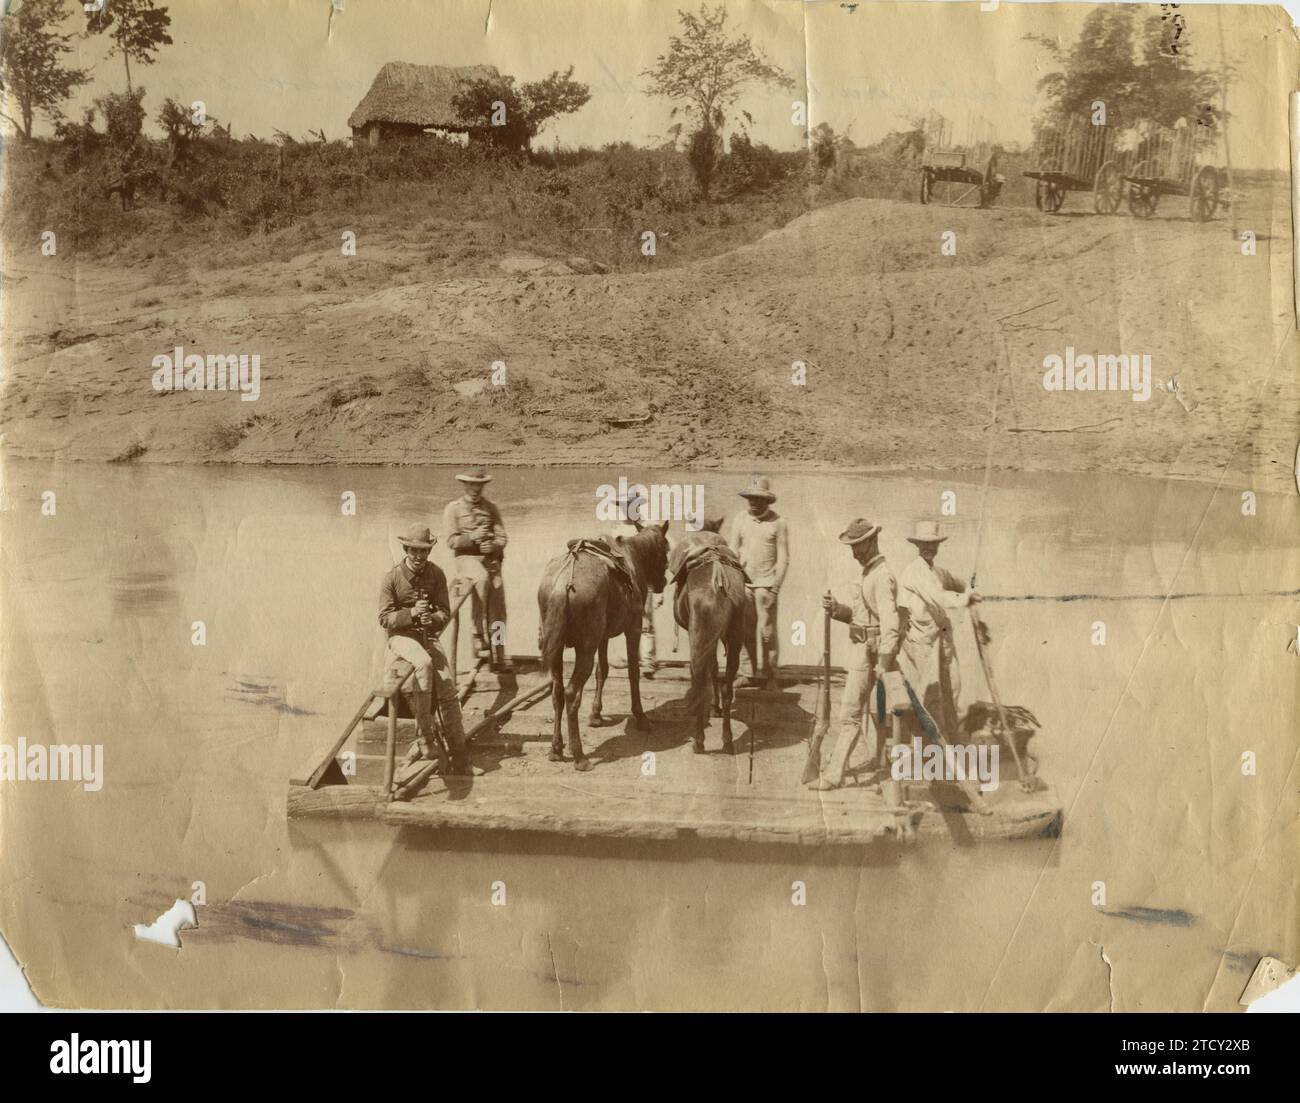 Cuba, January 1895. Cuban War. A couple from the Civil Guard takes prisoners taken by one of the columns that operate in the Eastern Department to Santiago de Cuba. The group is crossing the Cauto River on a tow raft. Credit: Album / Archivo ABC / Gómez Carrera Stock Photo